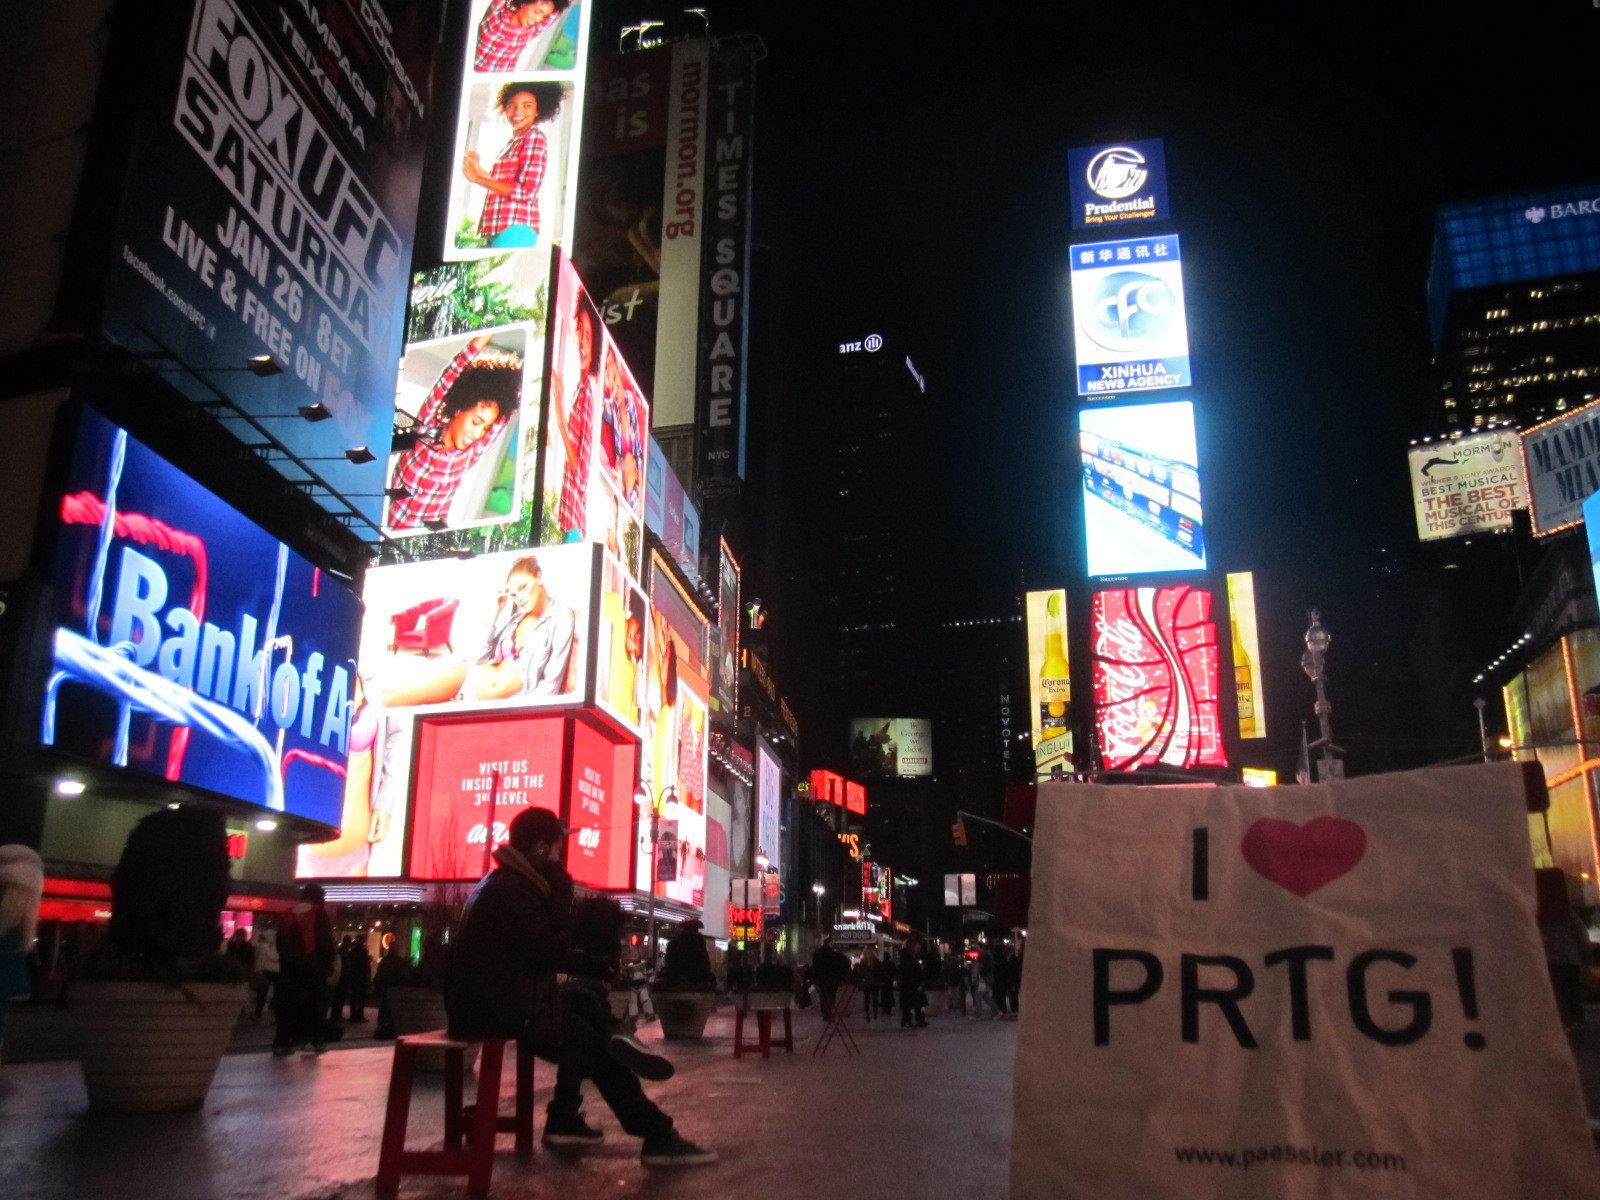 PRTG monitoring what's going on in Times Square, New York!